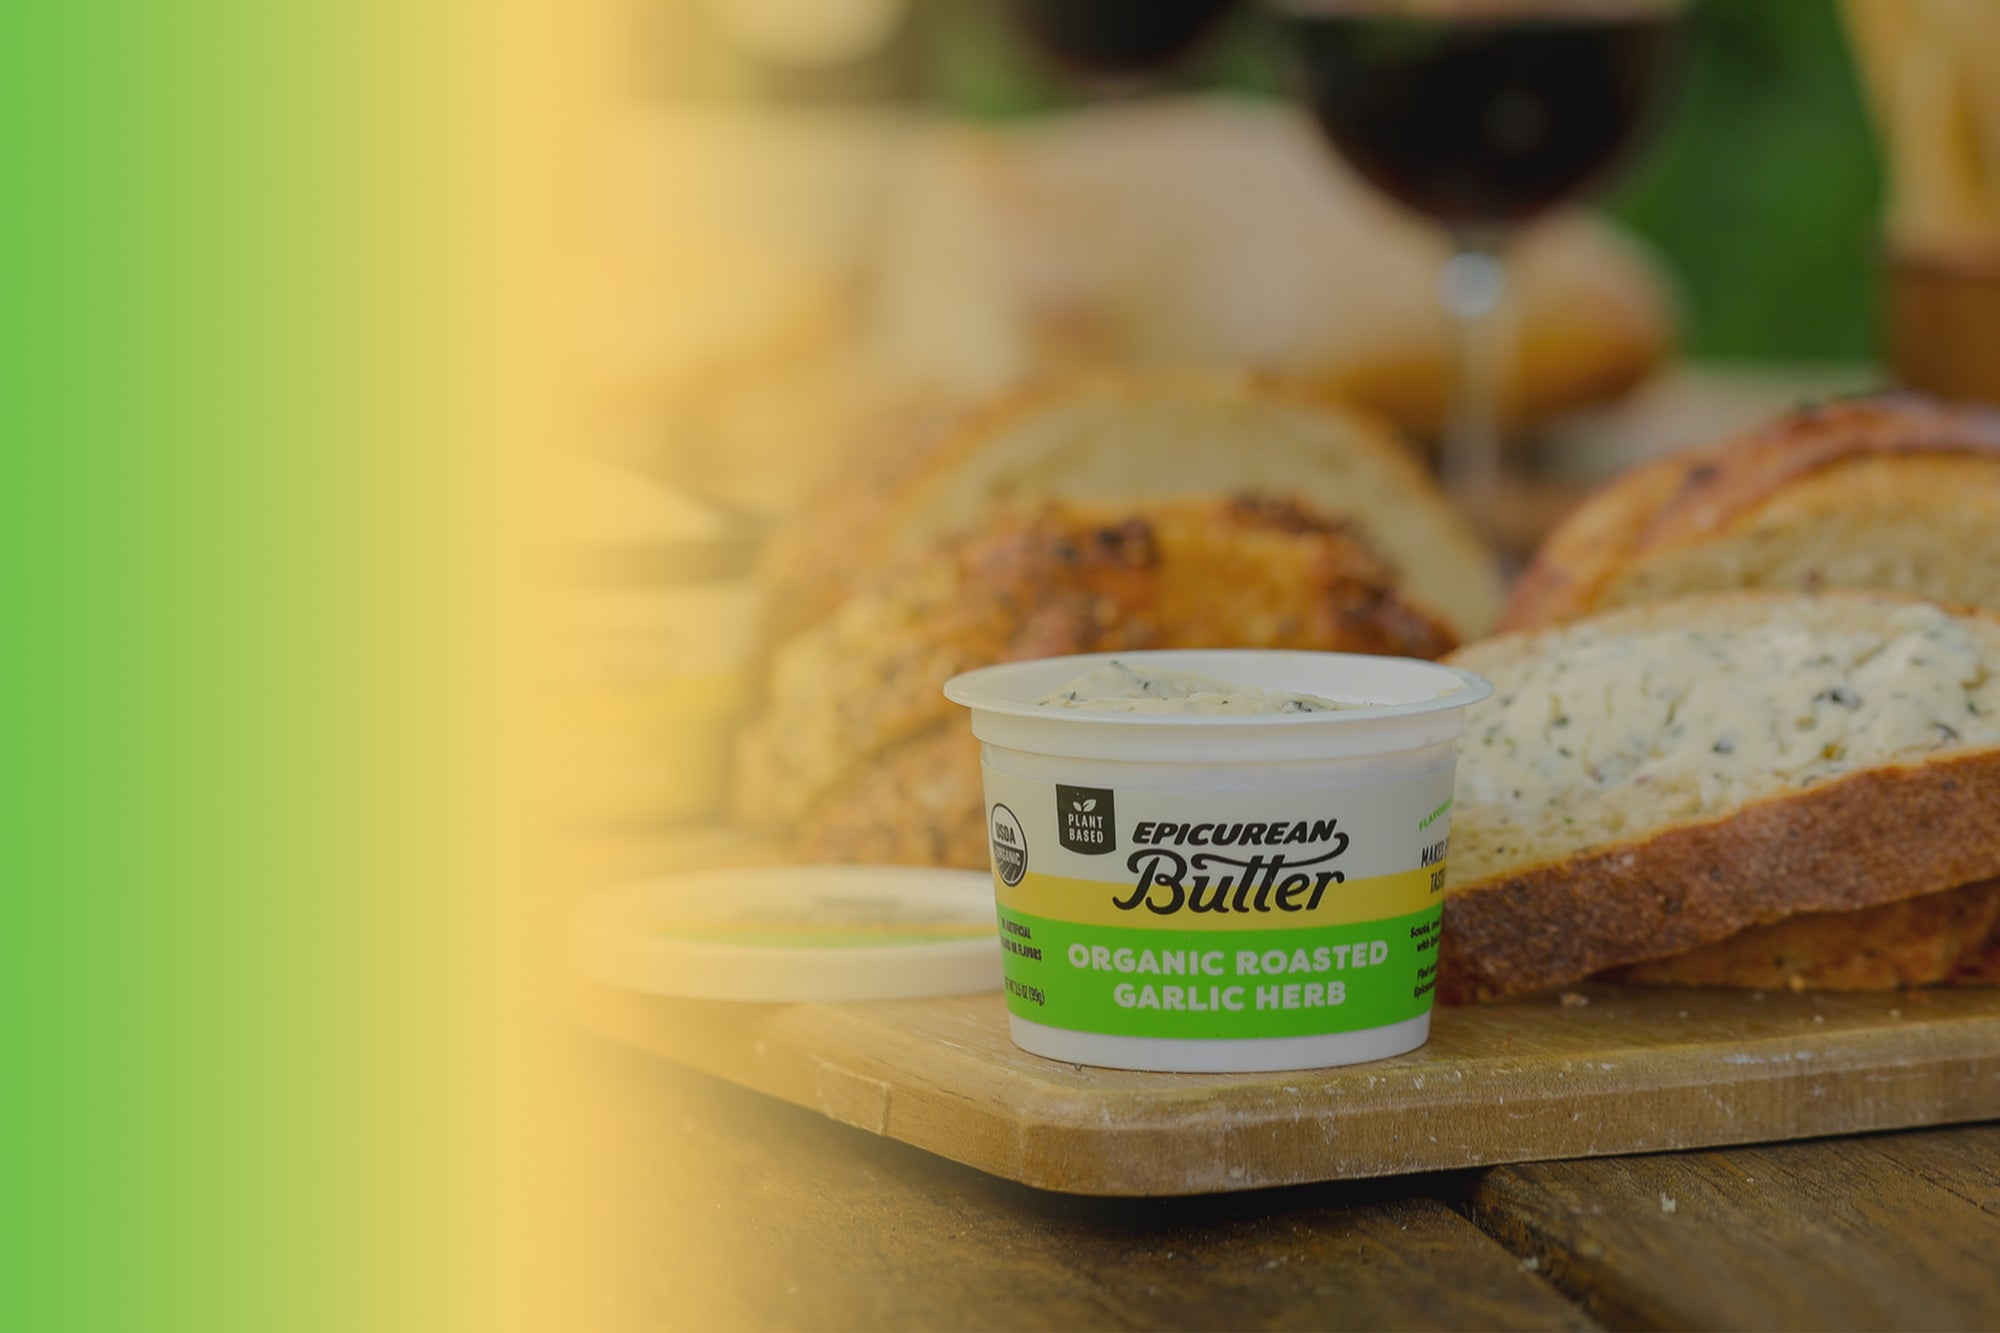 Epicurean Butter Plant Based Organic Roasted Garlic Herb Flavored Butter with wine and bread